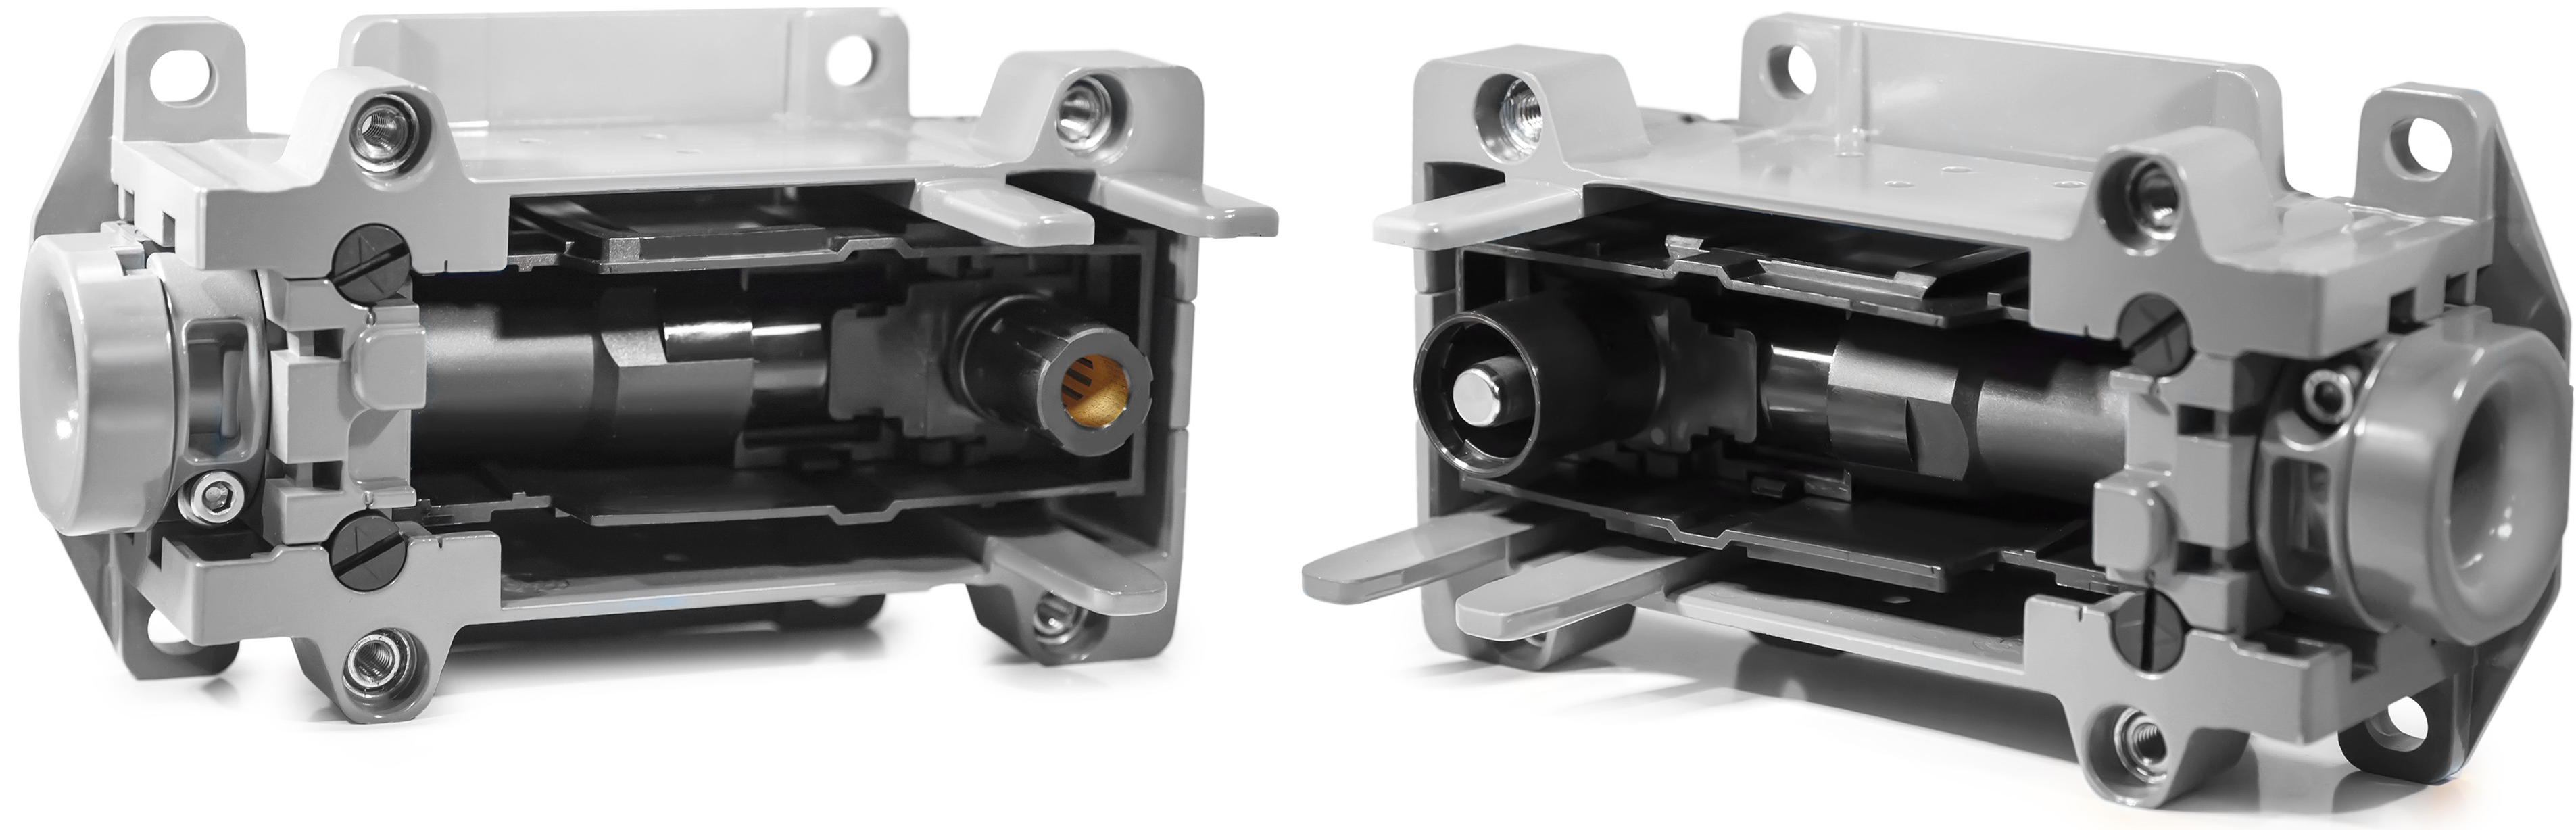 HeavyPower Rail Connectors from Smiths